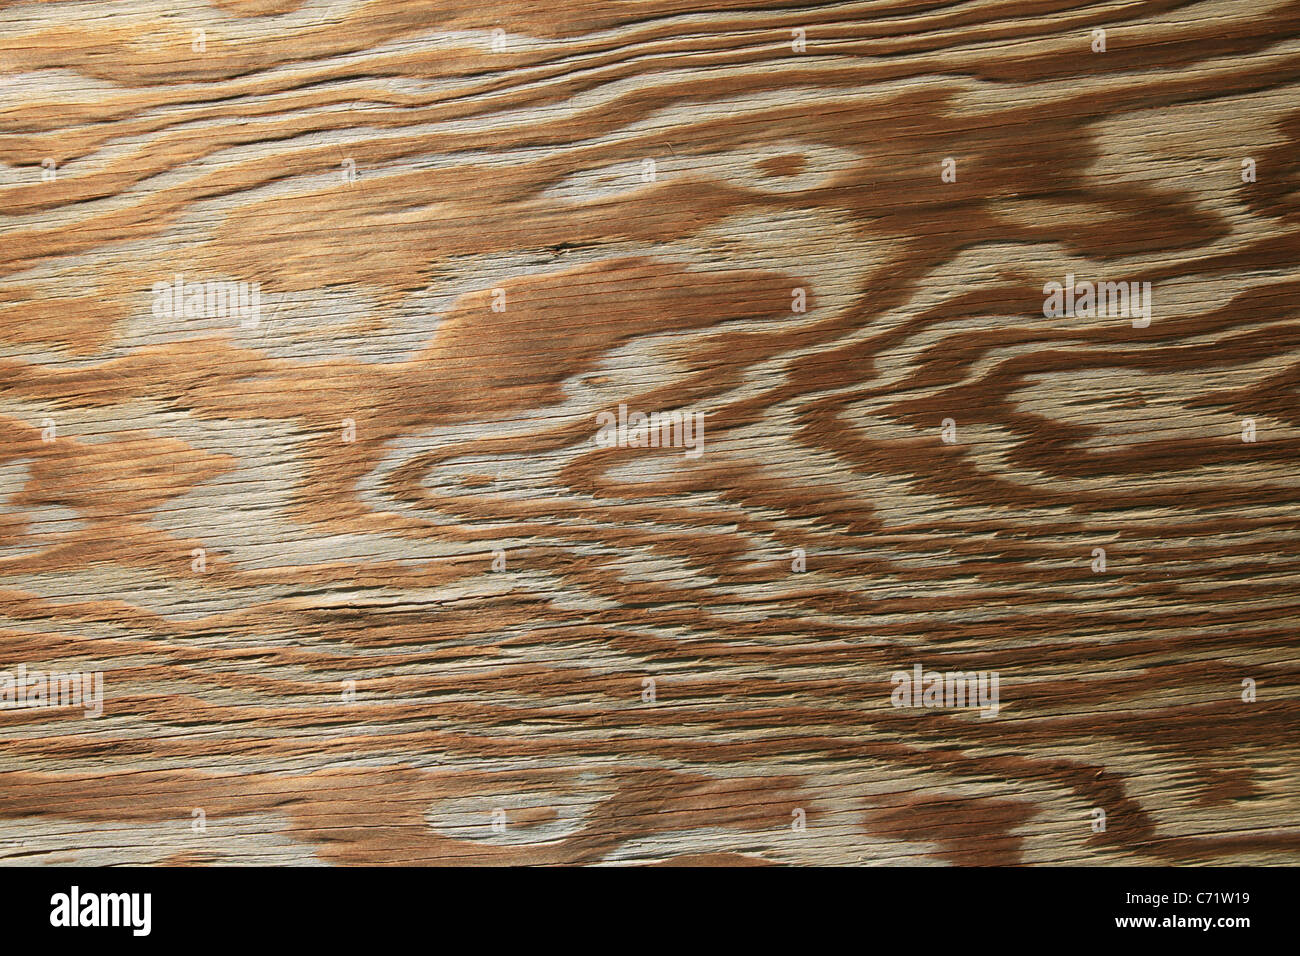 horizontal of old worn plywood background with grained texture Stock Photo